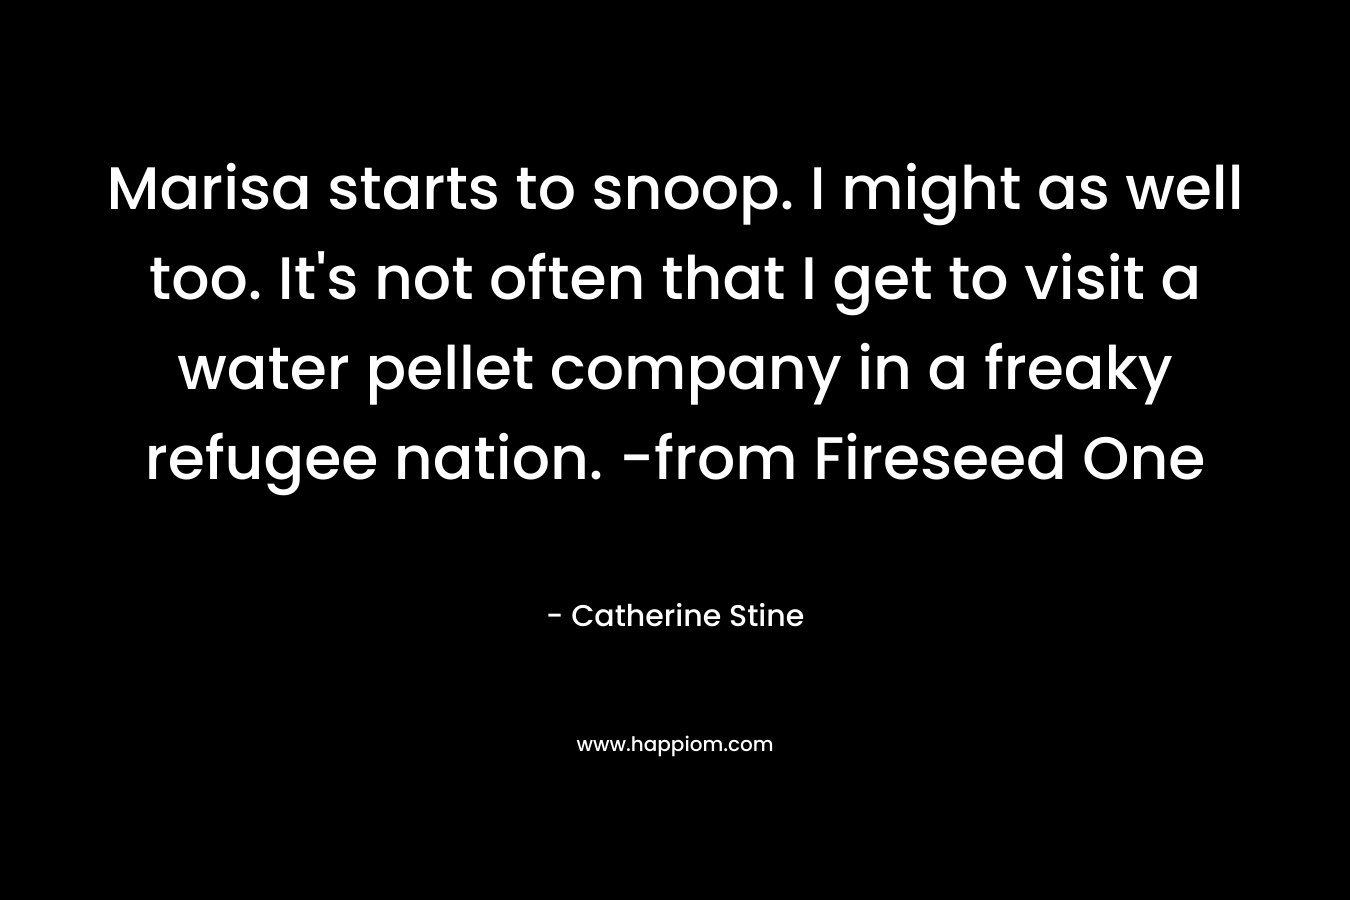 Marisa starts to snoop. I might as well too. It’s not often that I get to visit a water pellet company in a freaky refugee nation. -from Fireseed One – Catherine Stine